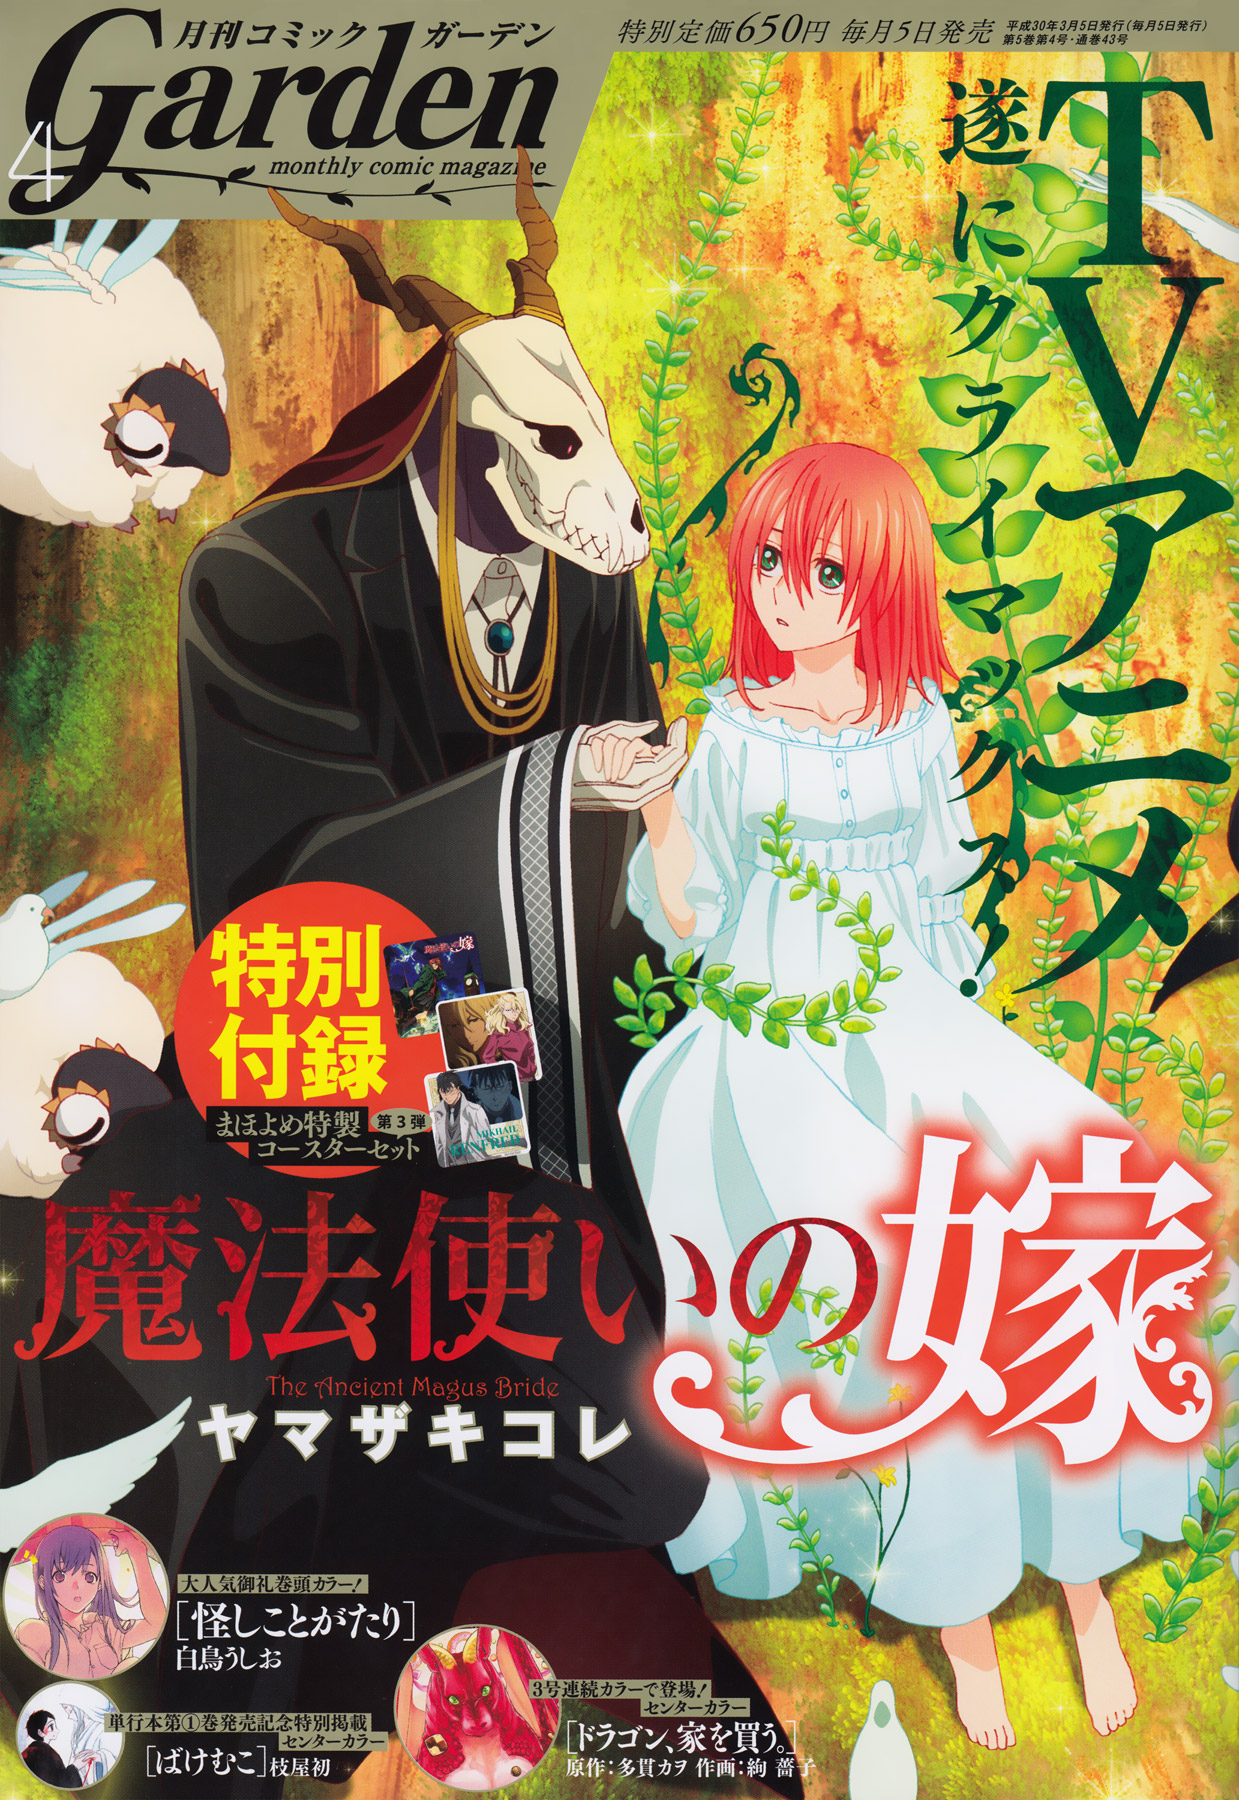 The Ancient Magus' Bride Vol. 9 Ch. 44 Nothing Seek, Nothing Fine.